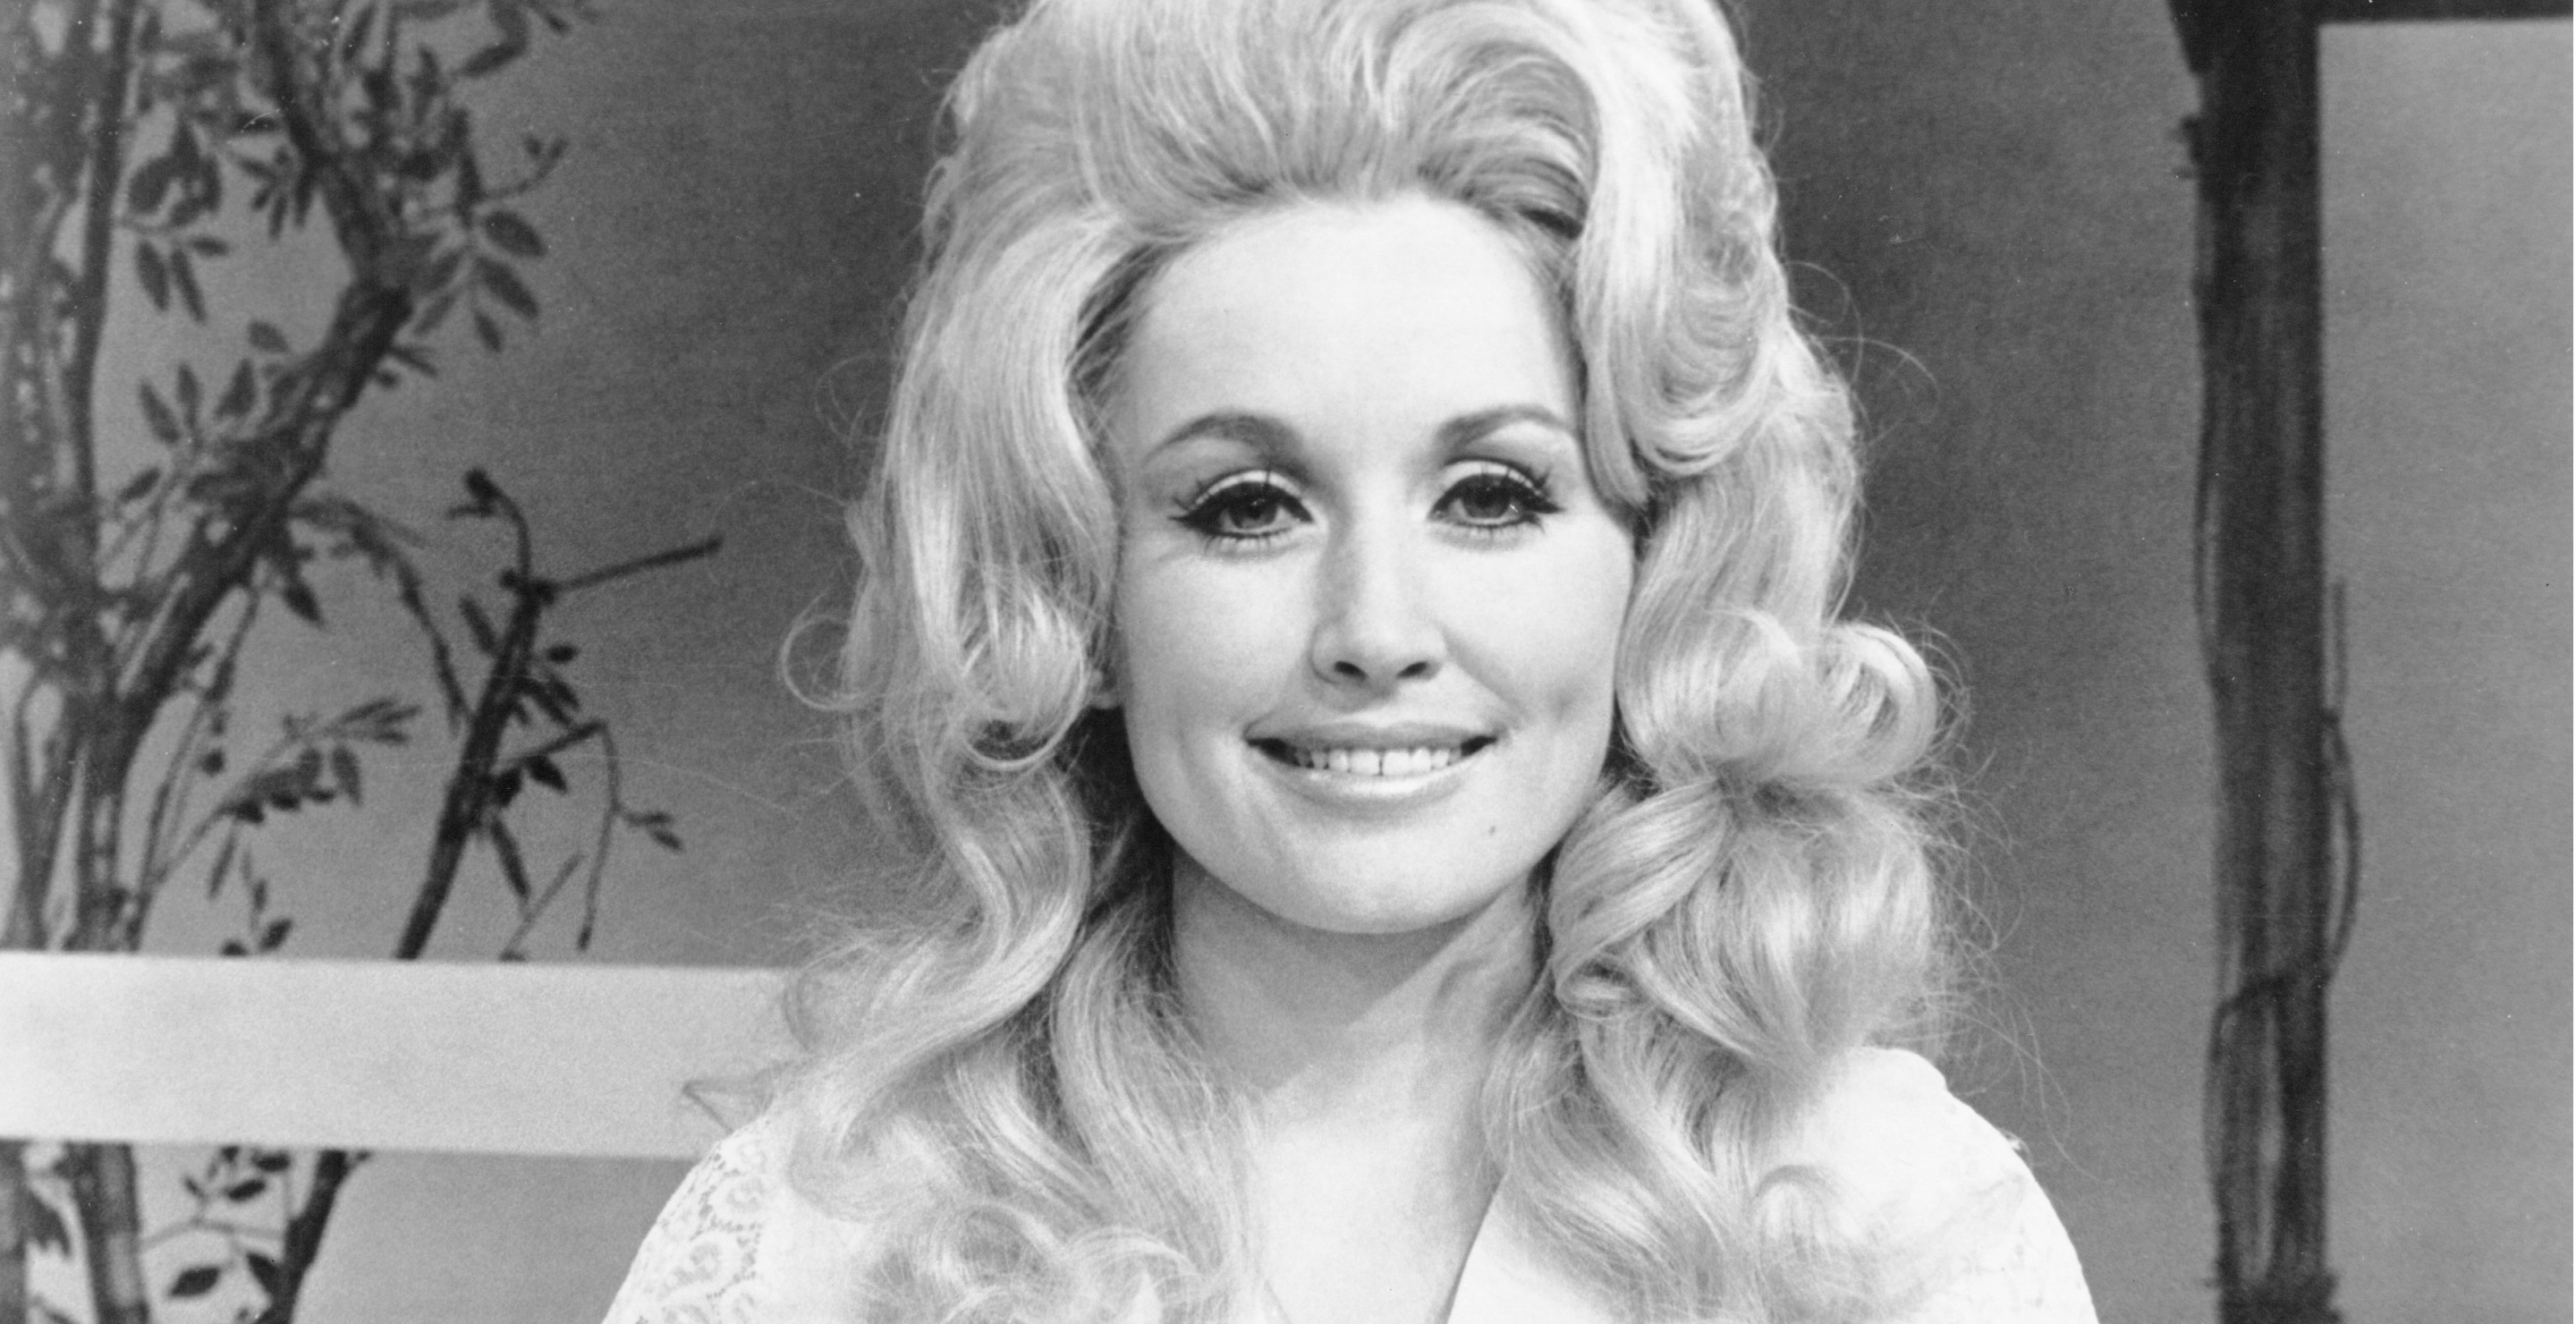 Dolly Parton Fans Can't Believe Retro Photo Is Music Icon